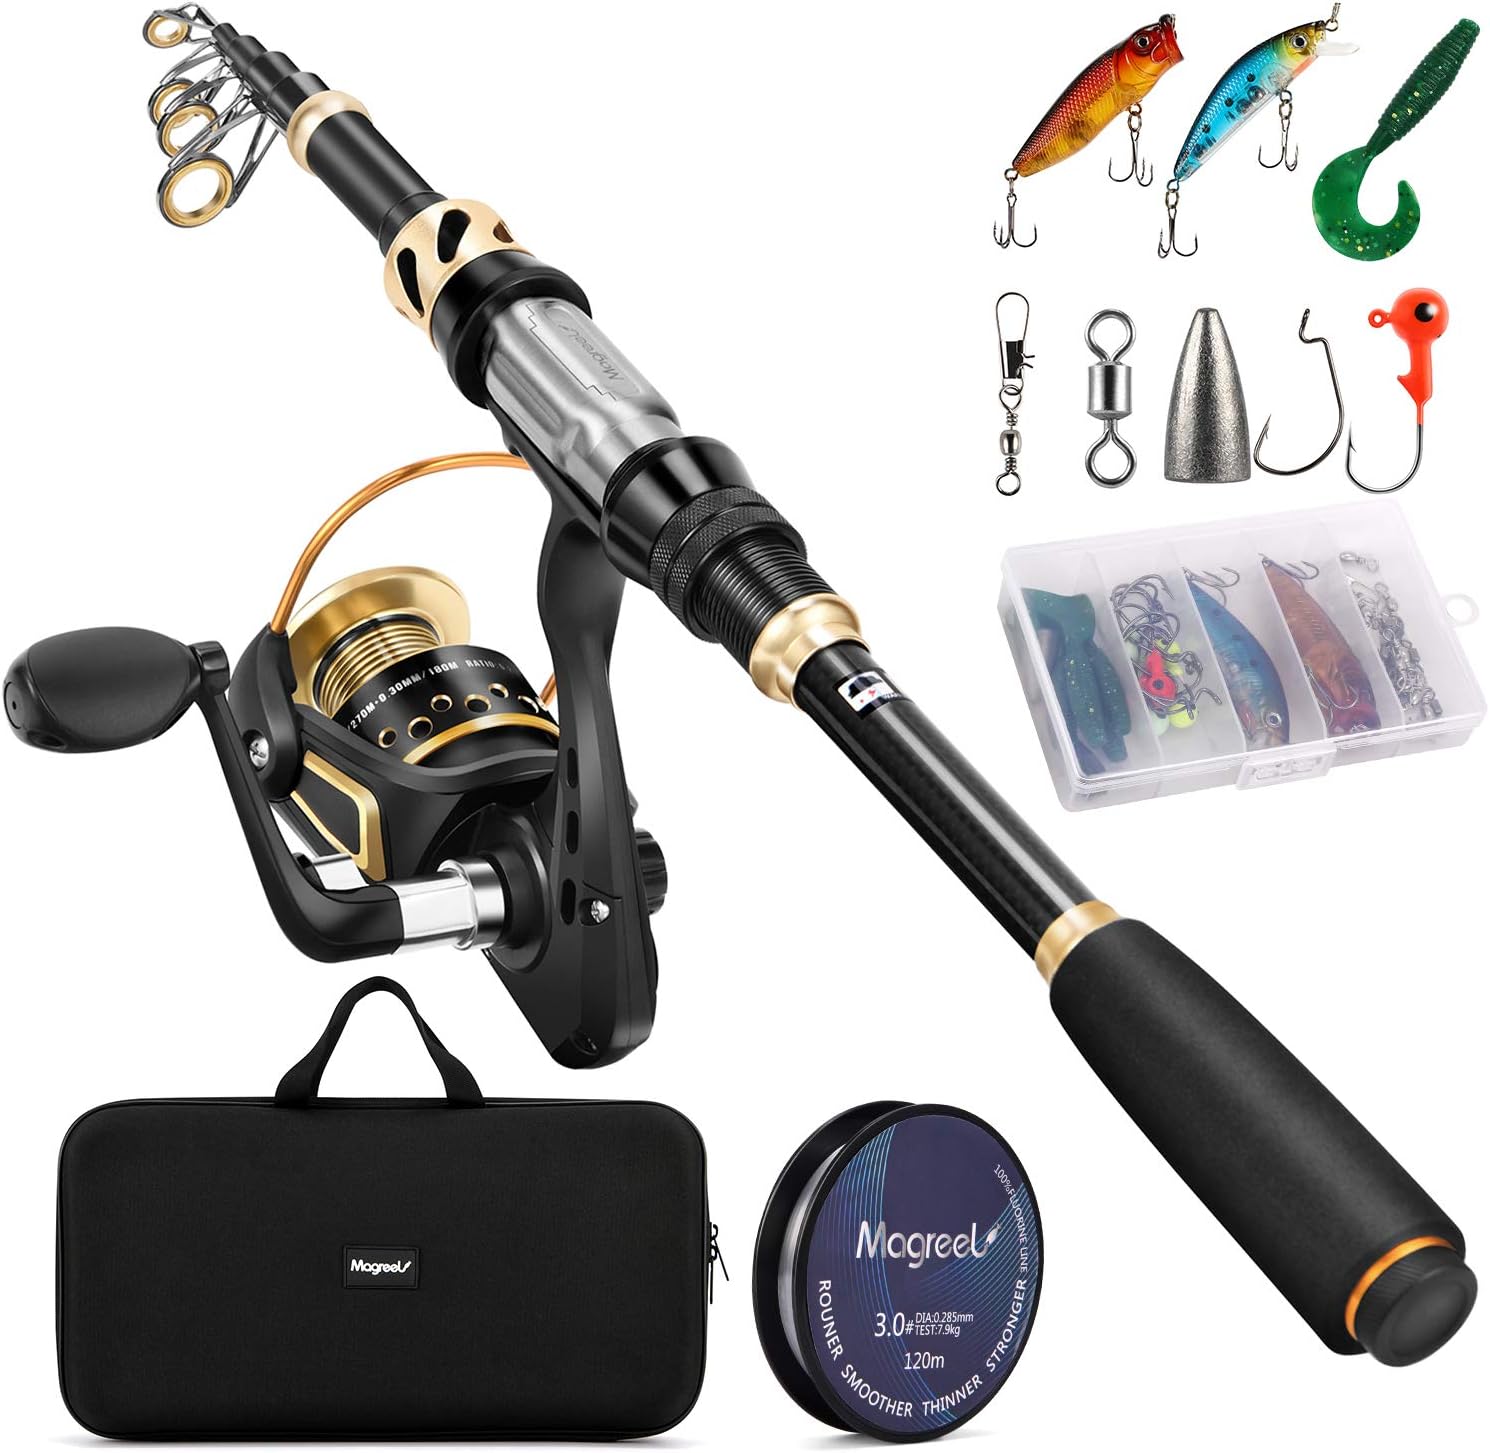 Magreel Telescopic Fishing Rod Combo Set Review